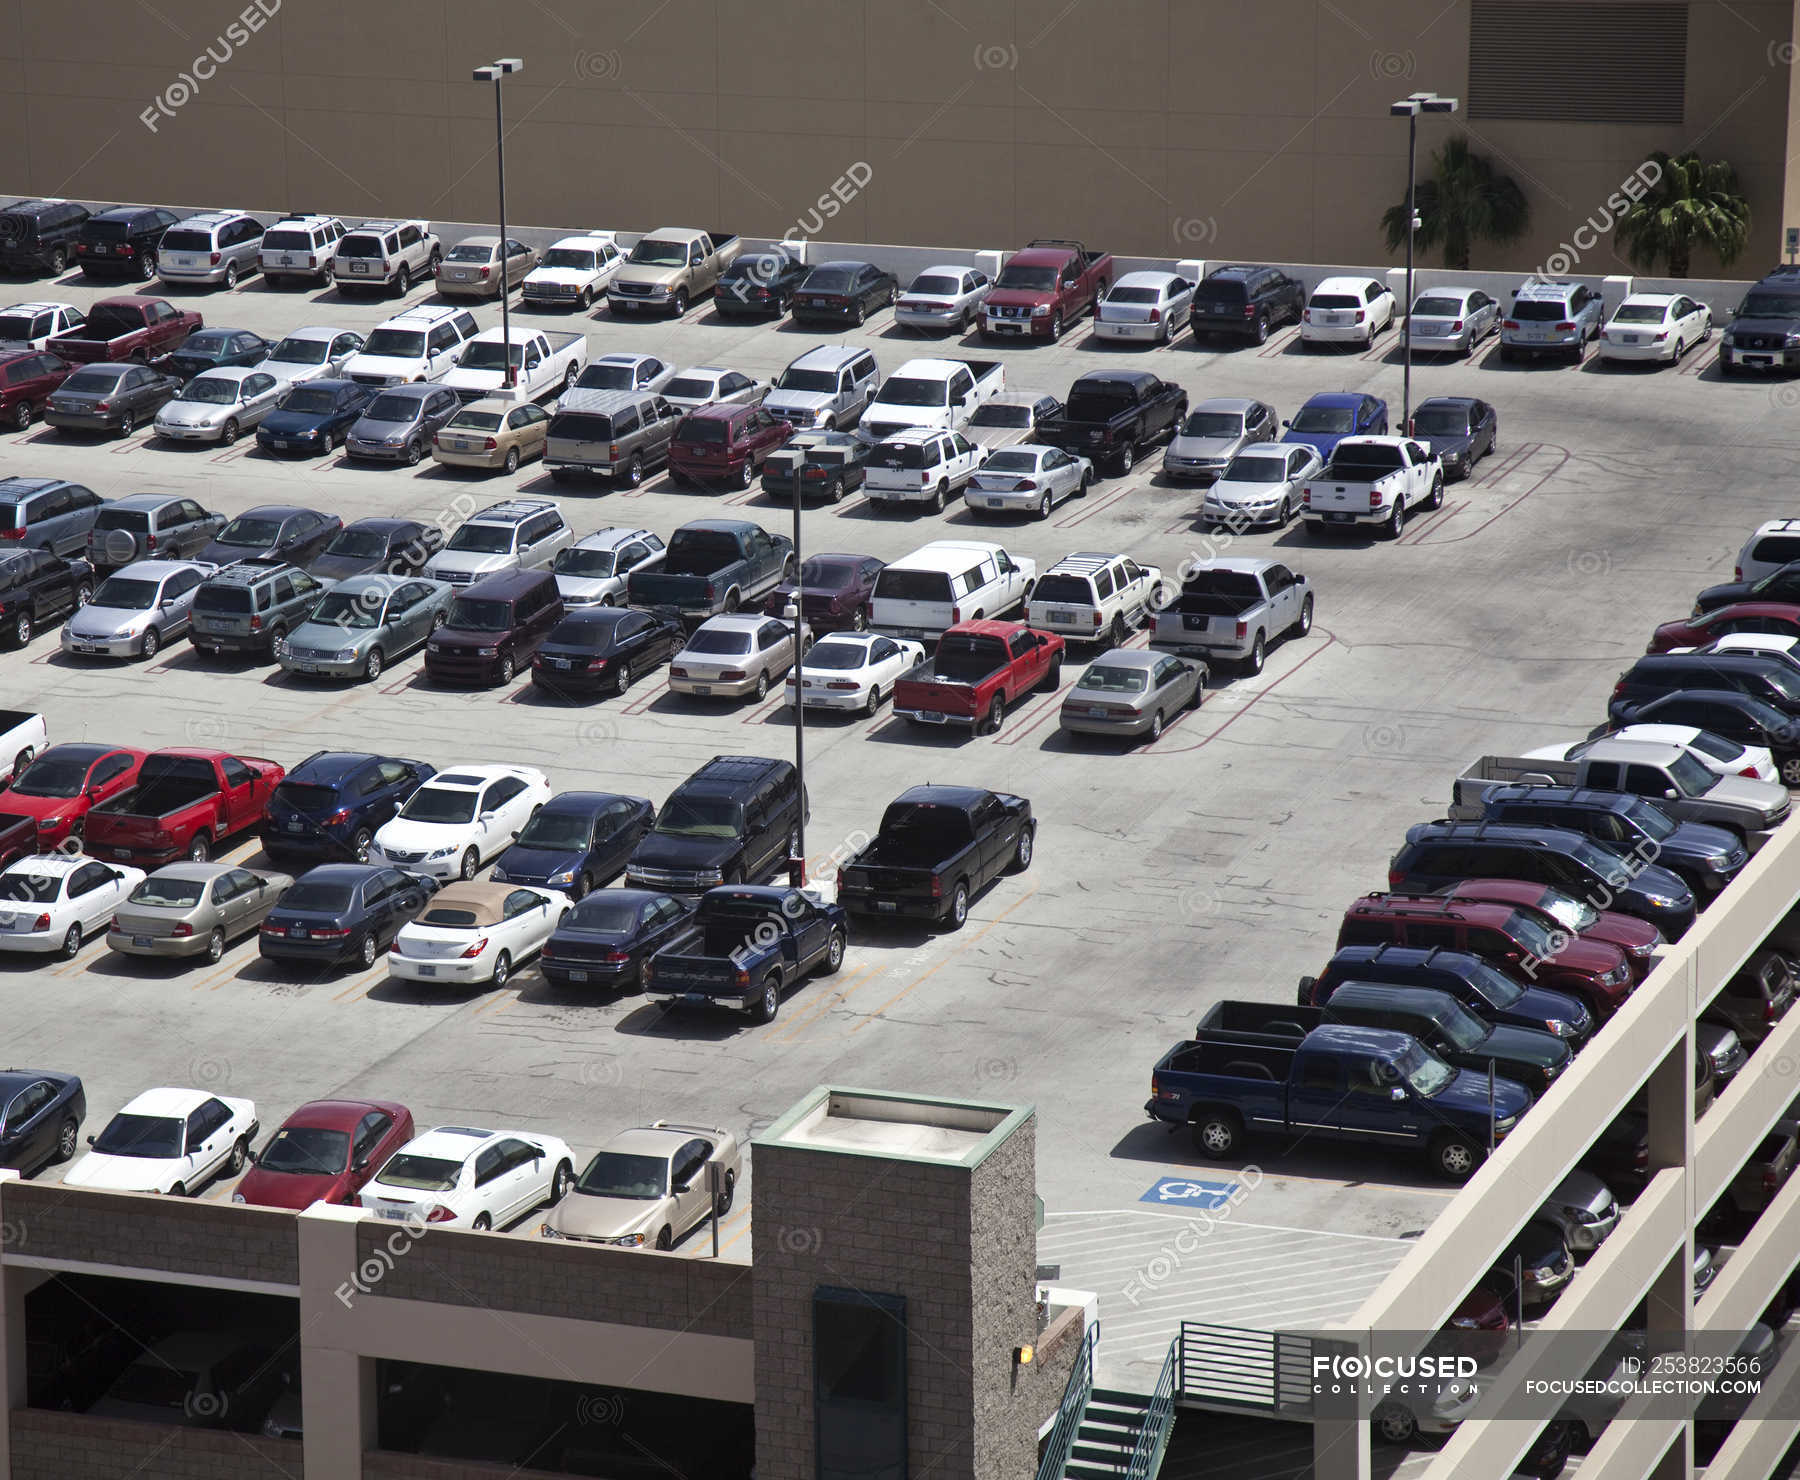 At lyve parfume Få kontrol Cars parked on rooftop parking structure in Las Vegas, Nevada, USA — rows,  architecture - Stock Photo | #253823566